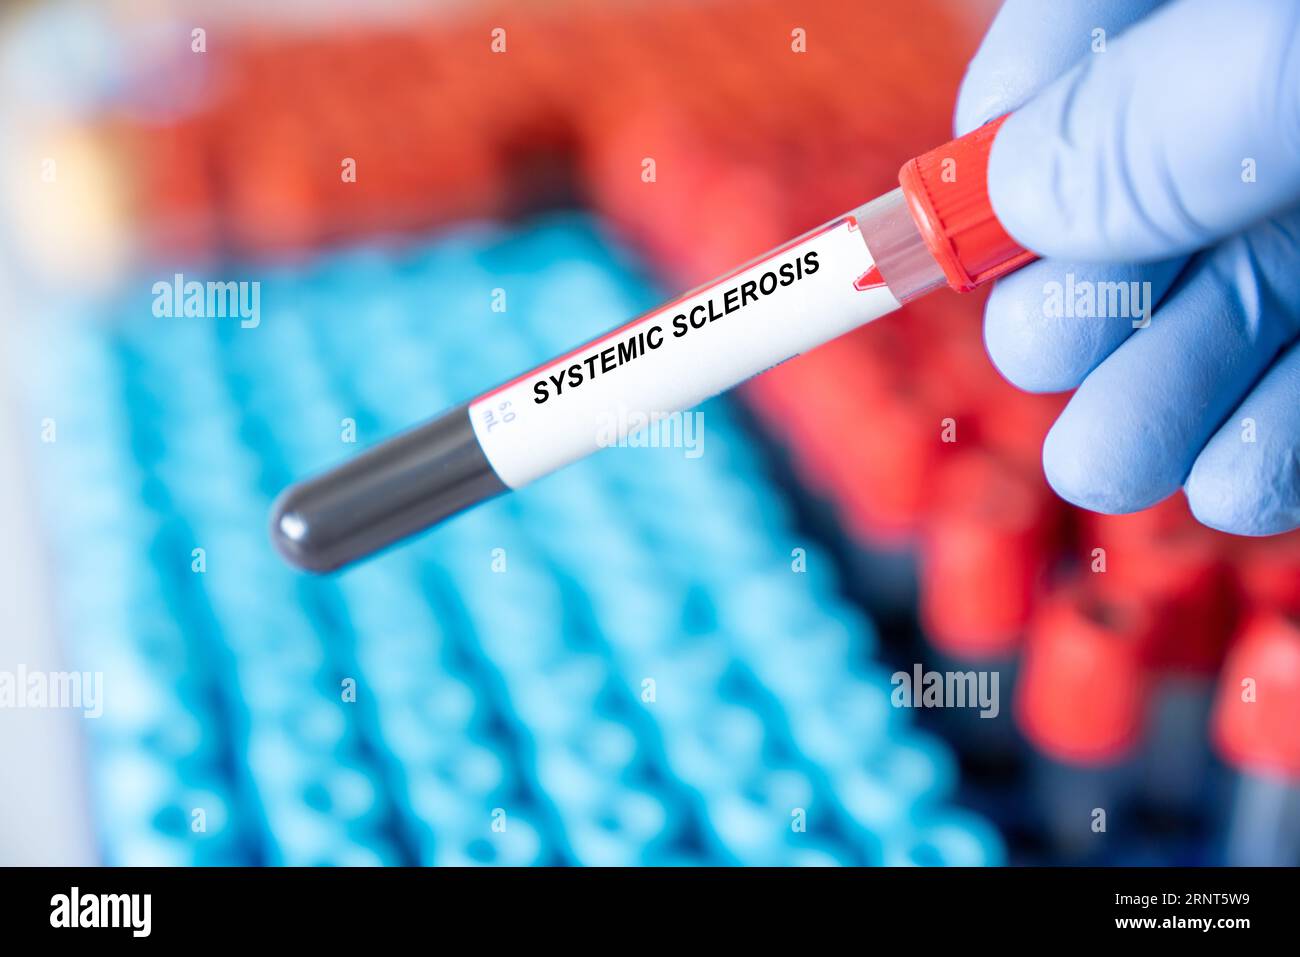 Systemic Sclerosis. Systemic Sclerosis disease blood test inmedical laboratory Stock Photo